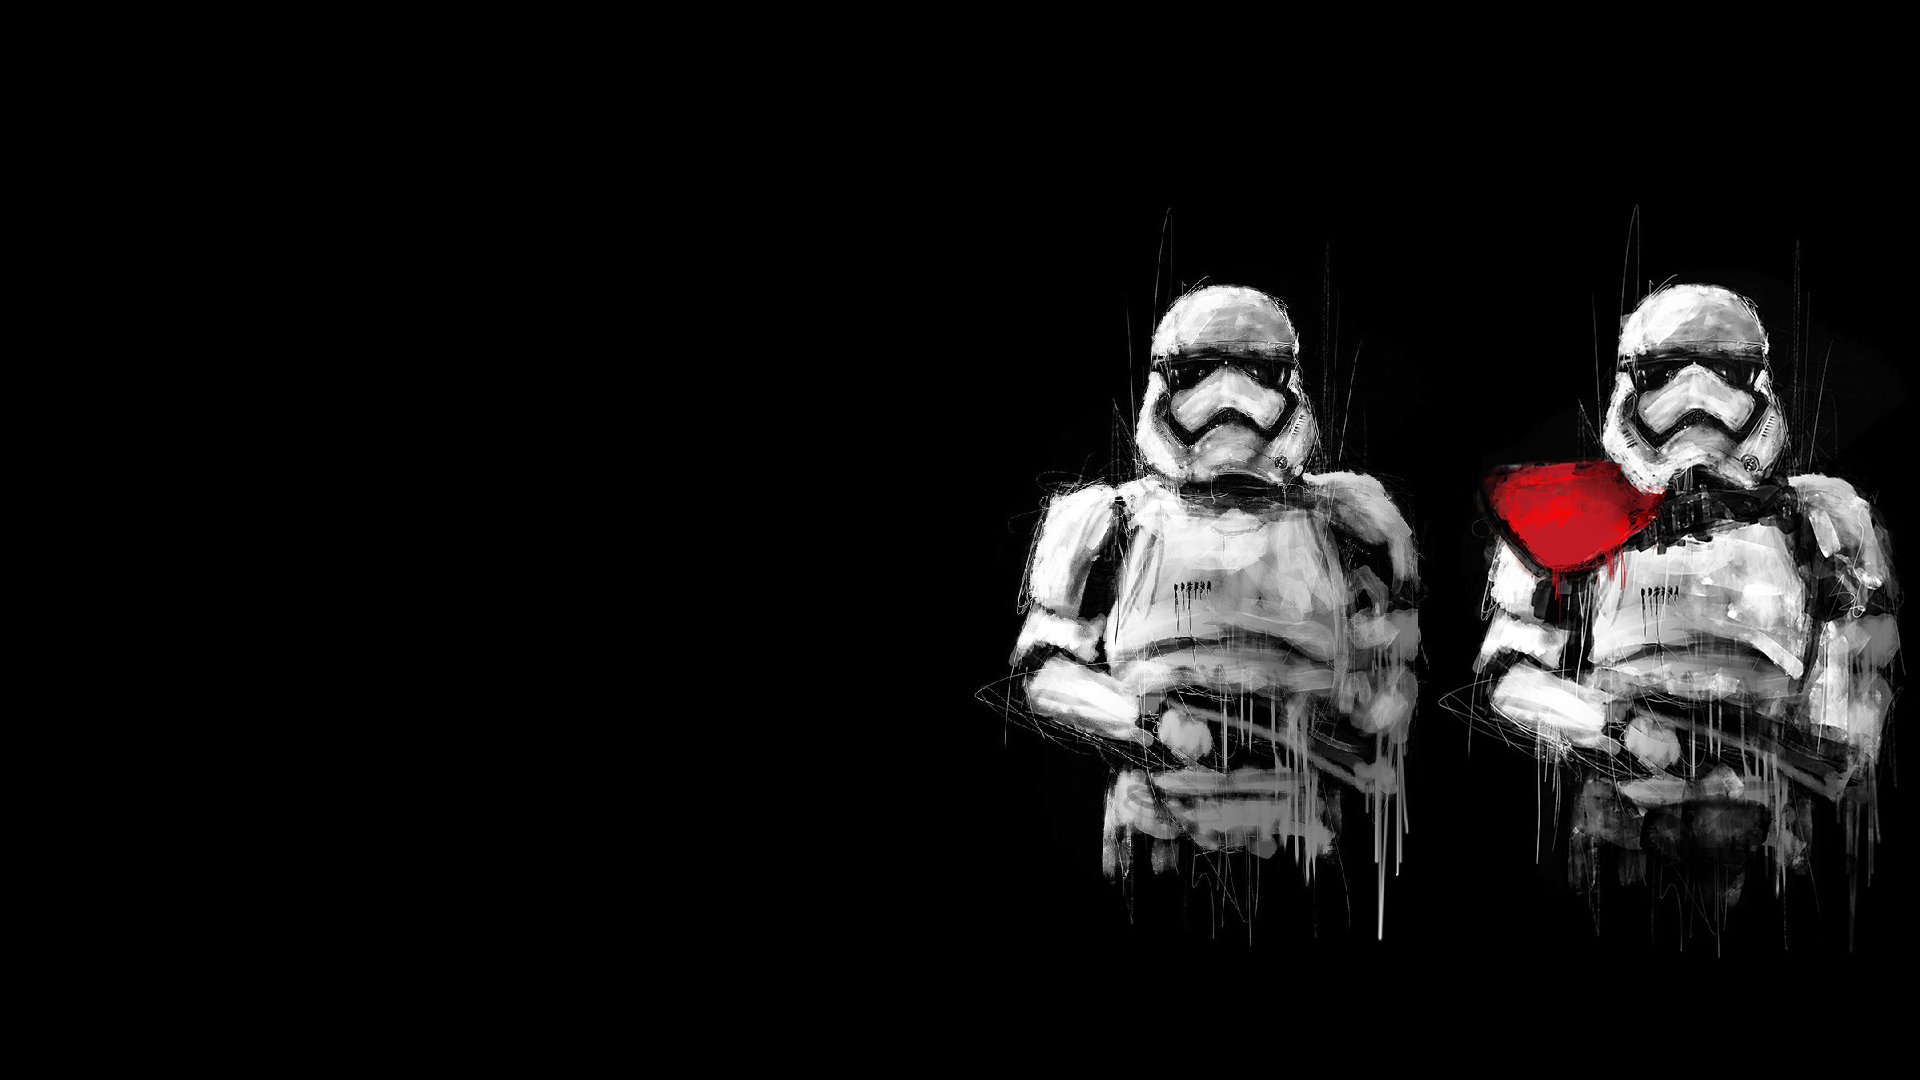 General 1920x1080 stormtrooper Star Wars sketches science fiction Imperial Forces simple background black background Imperial Stormtrooper artwork selective coloring movie characters